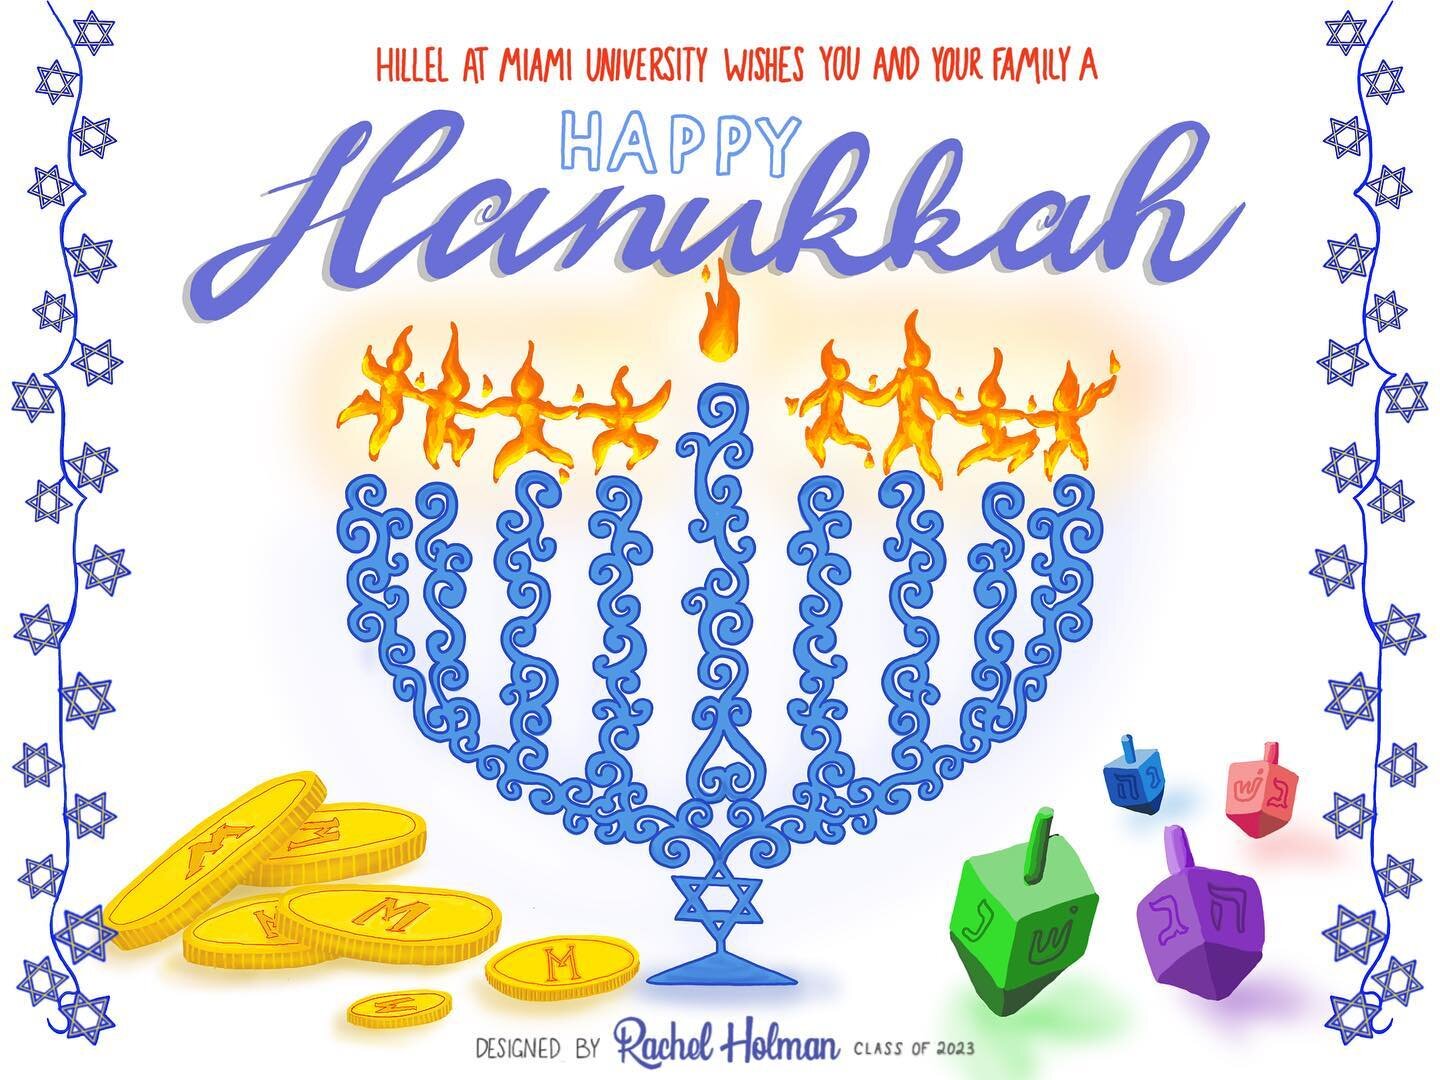 Wishing you all a joyful + healthy Hanukkah! Hoping you find more brightness than darkness this holiday season &mdash; from your Hillel family. (Hanukkah graphic loving designed by the incredible @r.holms). 🕎✡️❤️